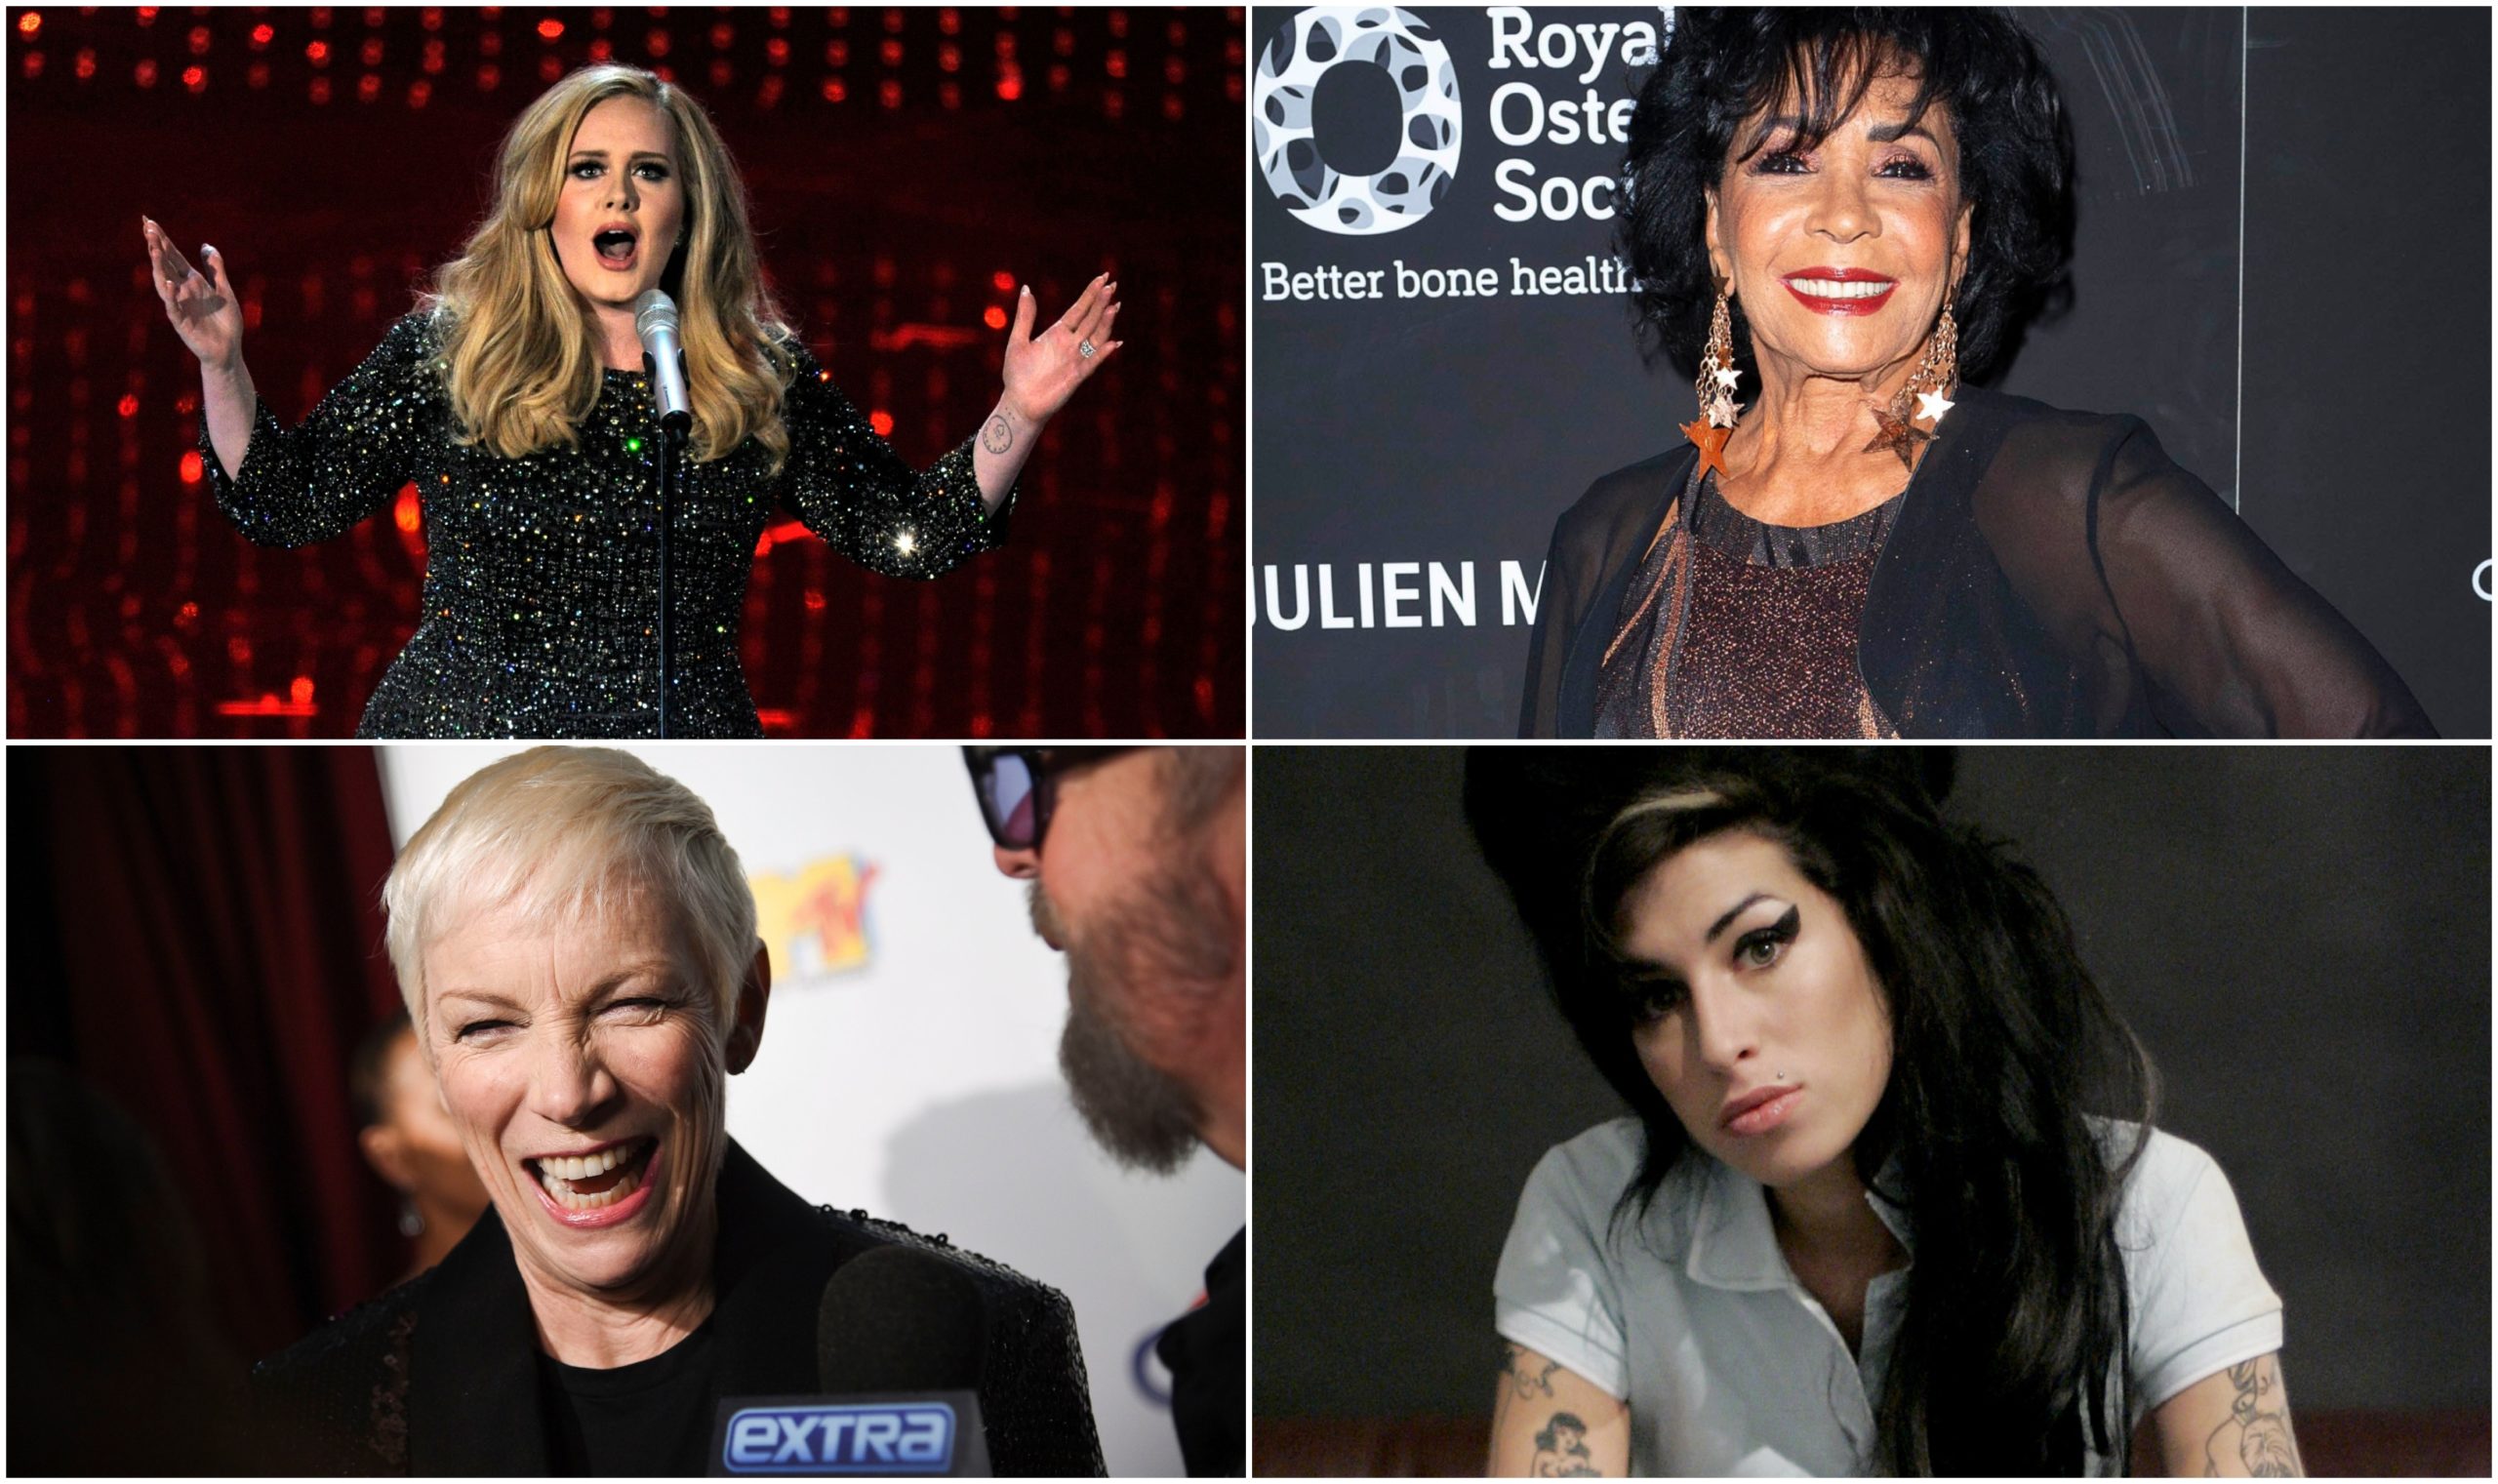 10 Of The Best Uk Female Singers From Adele To Annie Lennox Amy Winehouse To Shirley Bassey